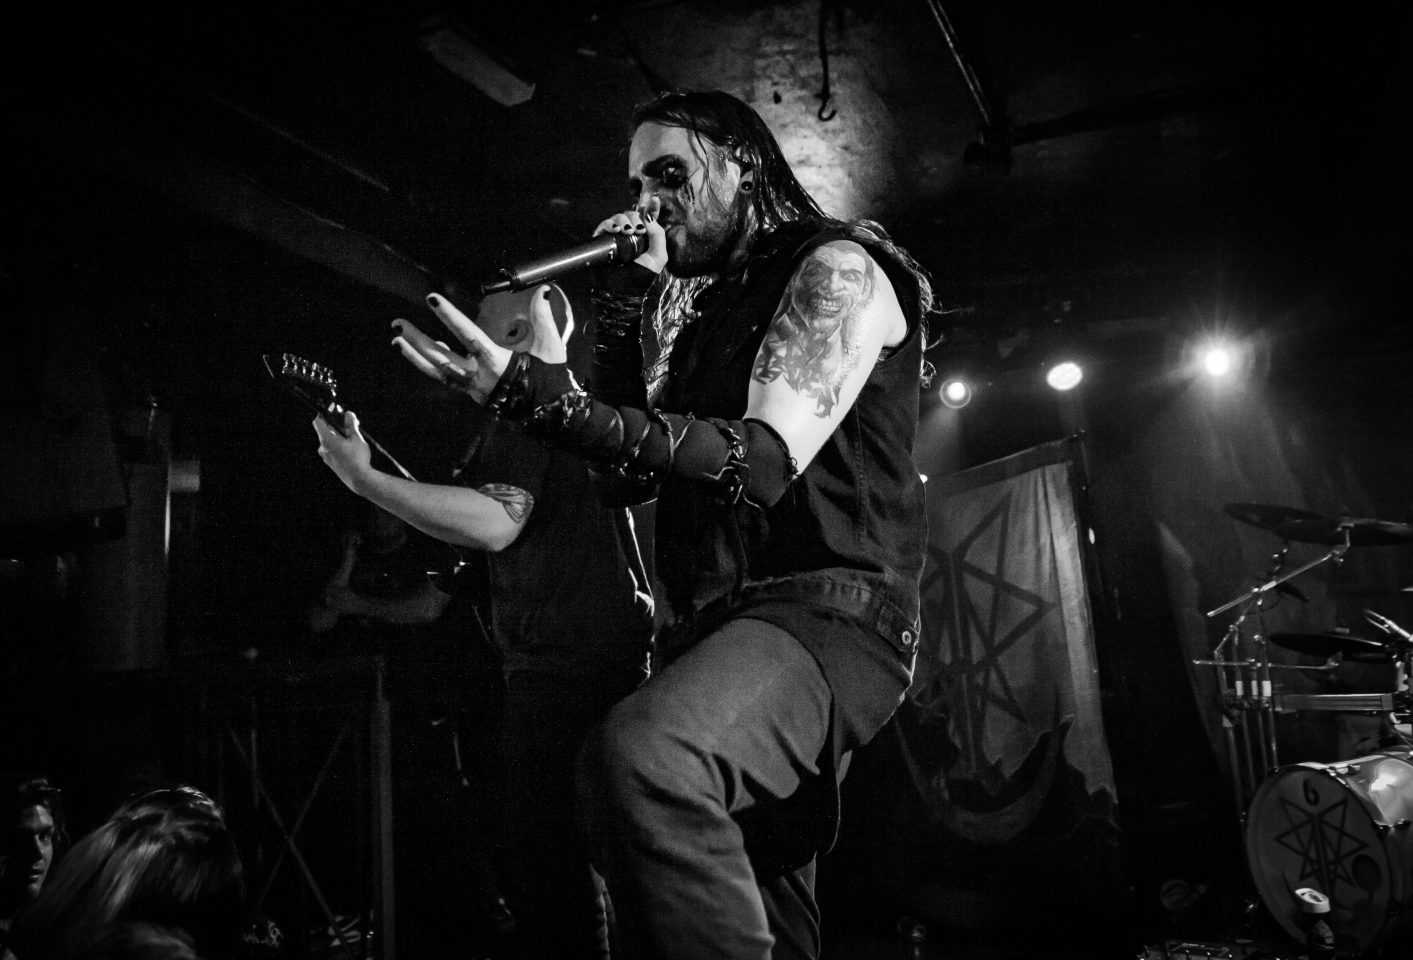 Ingested – Live From The Underworld